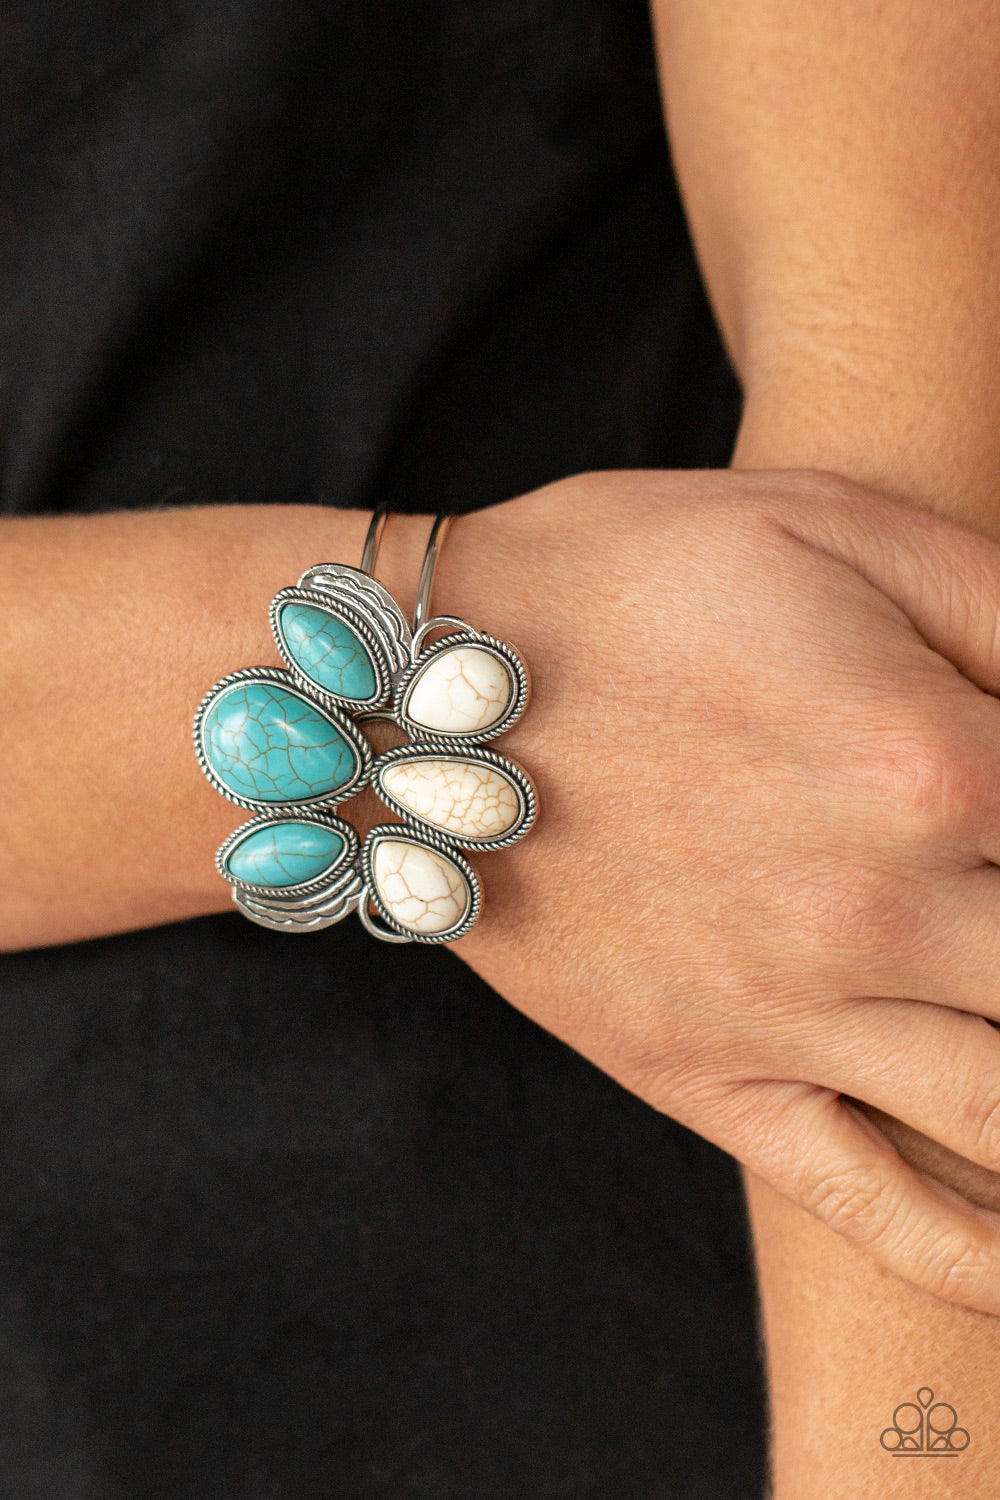 Paparazzi Accessories Botanical Badlands - White Bracelets encased in rope-like silver accents, a series of oversized oval and teardrop turquoise and white stone frames stack into a lotus-like floral frame atop a layered silver cuff. Features a hinged closure.  Sold as one individual bracelet.  Paparazzi Jewelry is lead and nickel free so it's perfect for sensitive skin too!